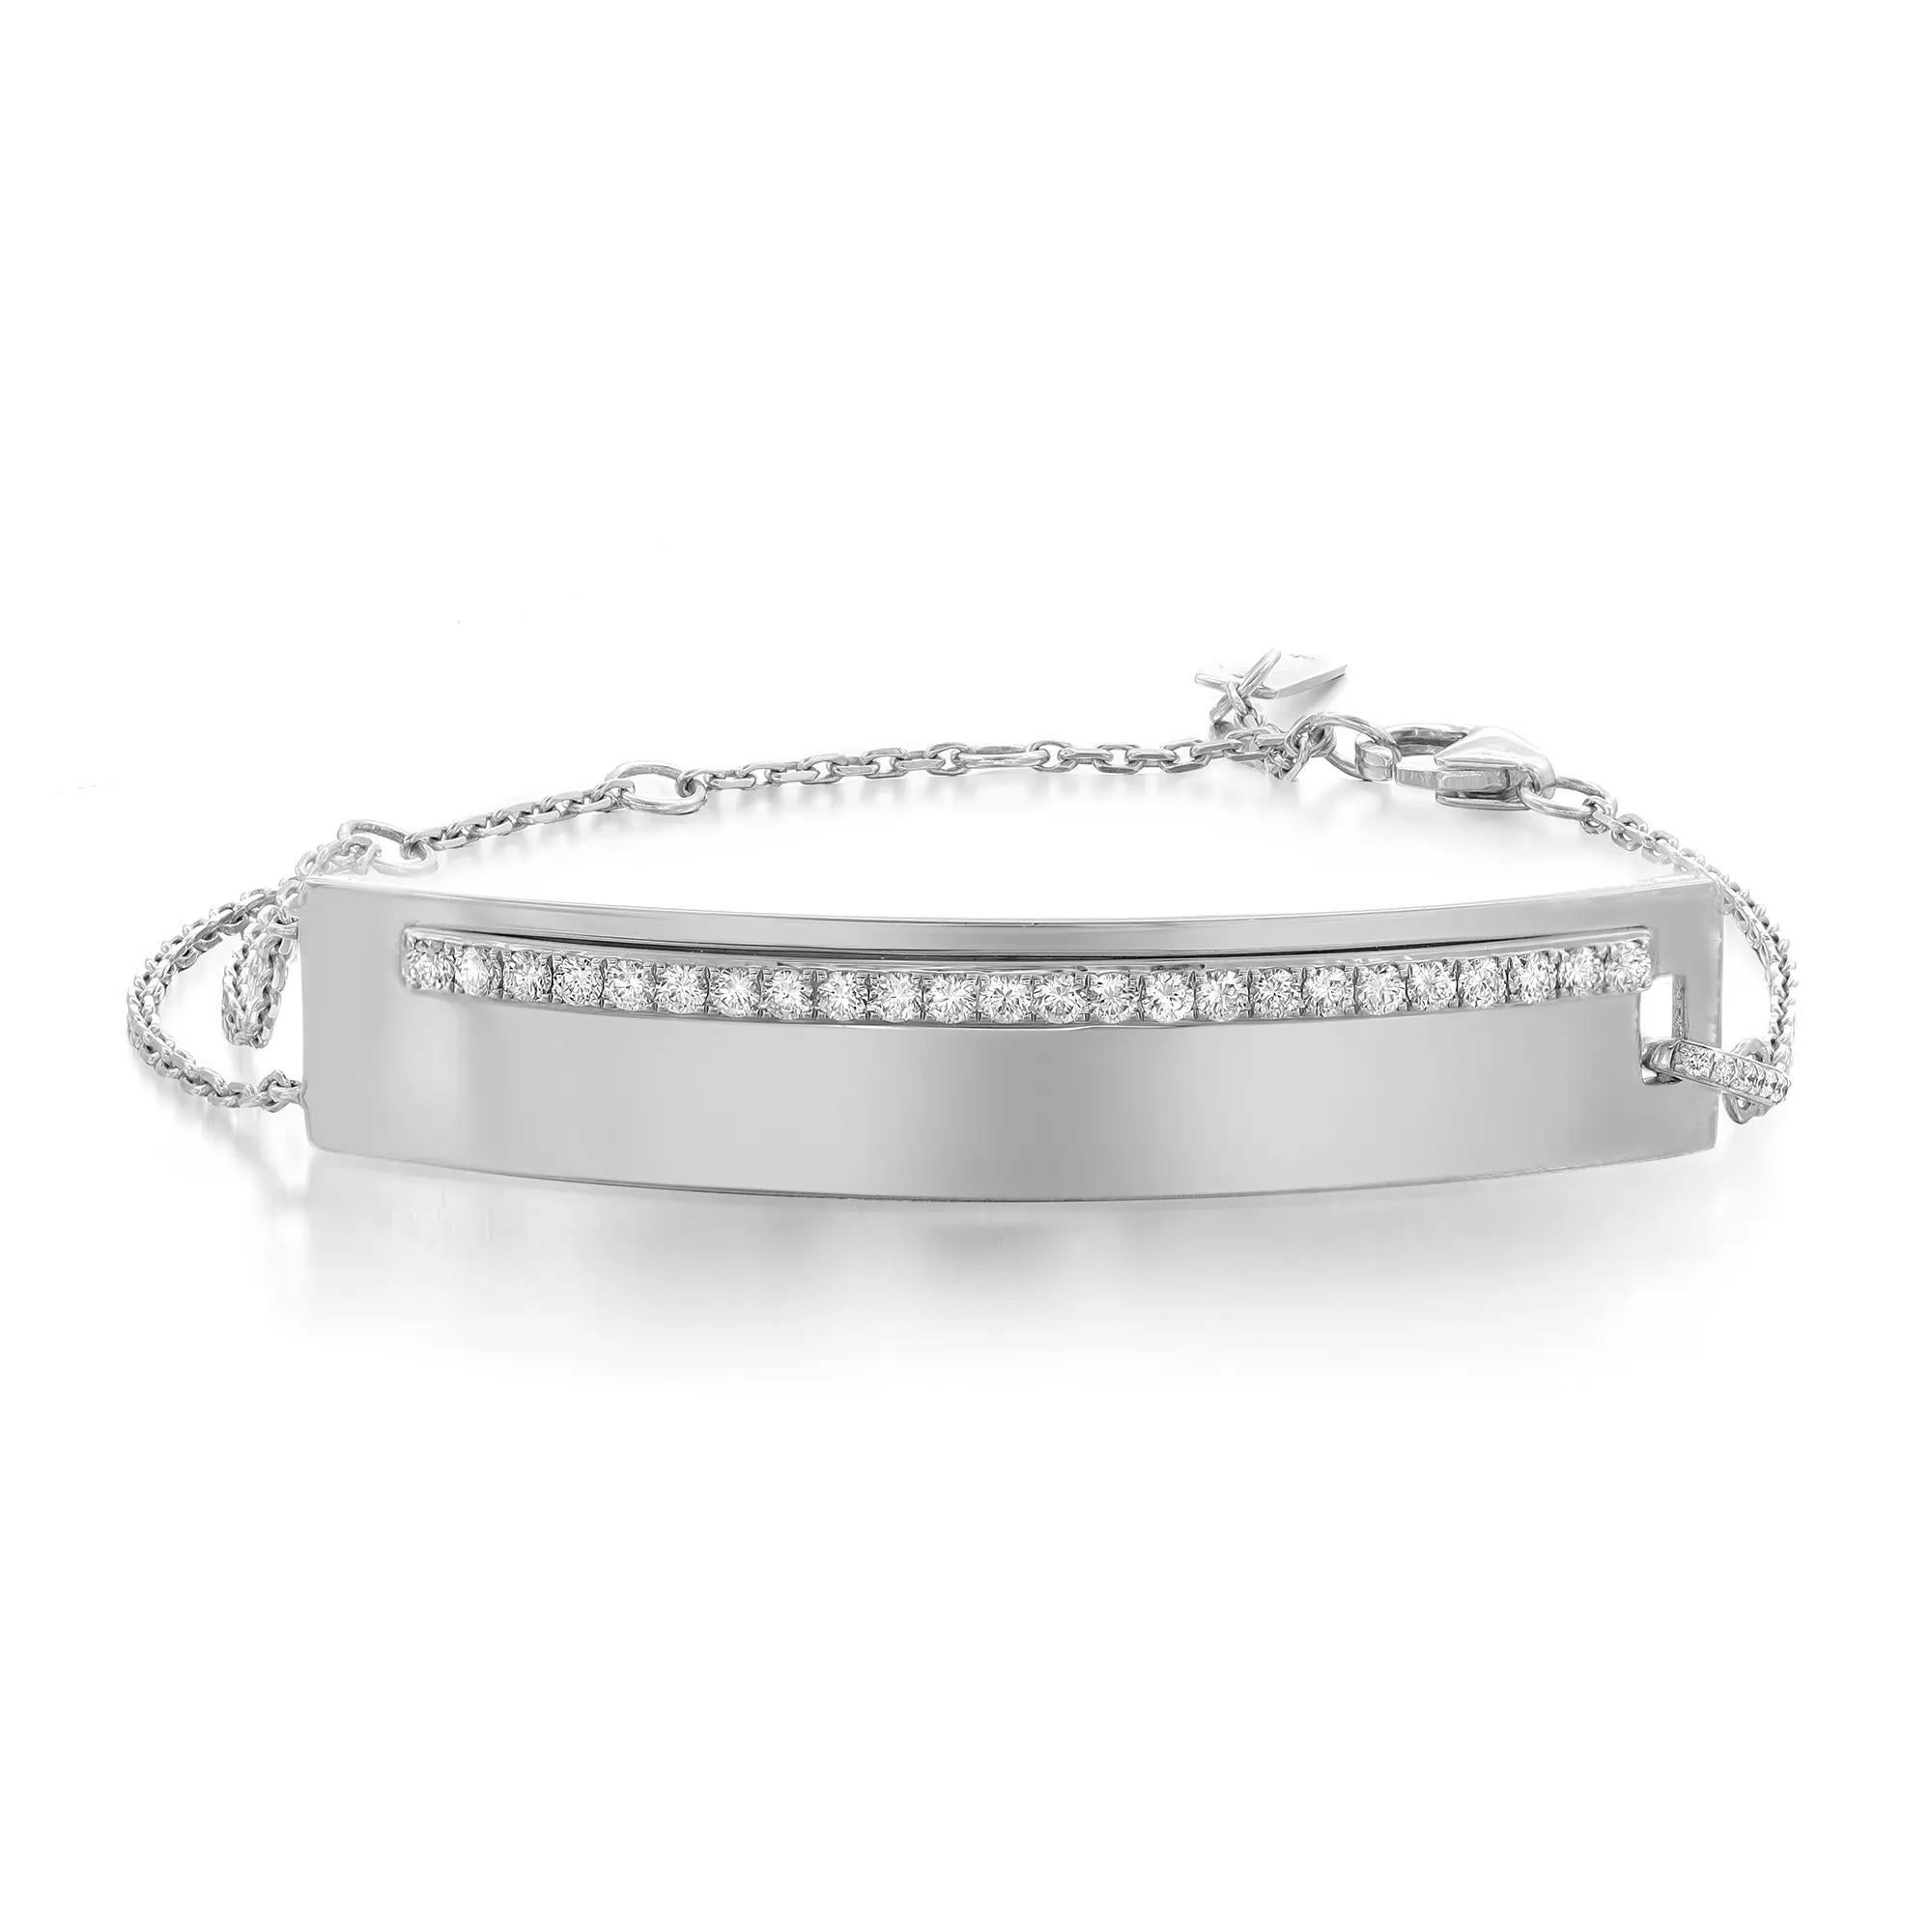 Messika 0.44Cttw Kate Sur Chaine Diamond Bracelet 18K White Gold 7.5 Inches In New Condition For Sale In New York, NY